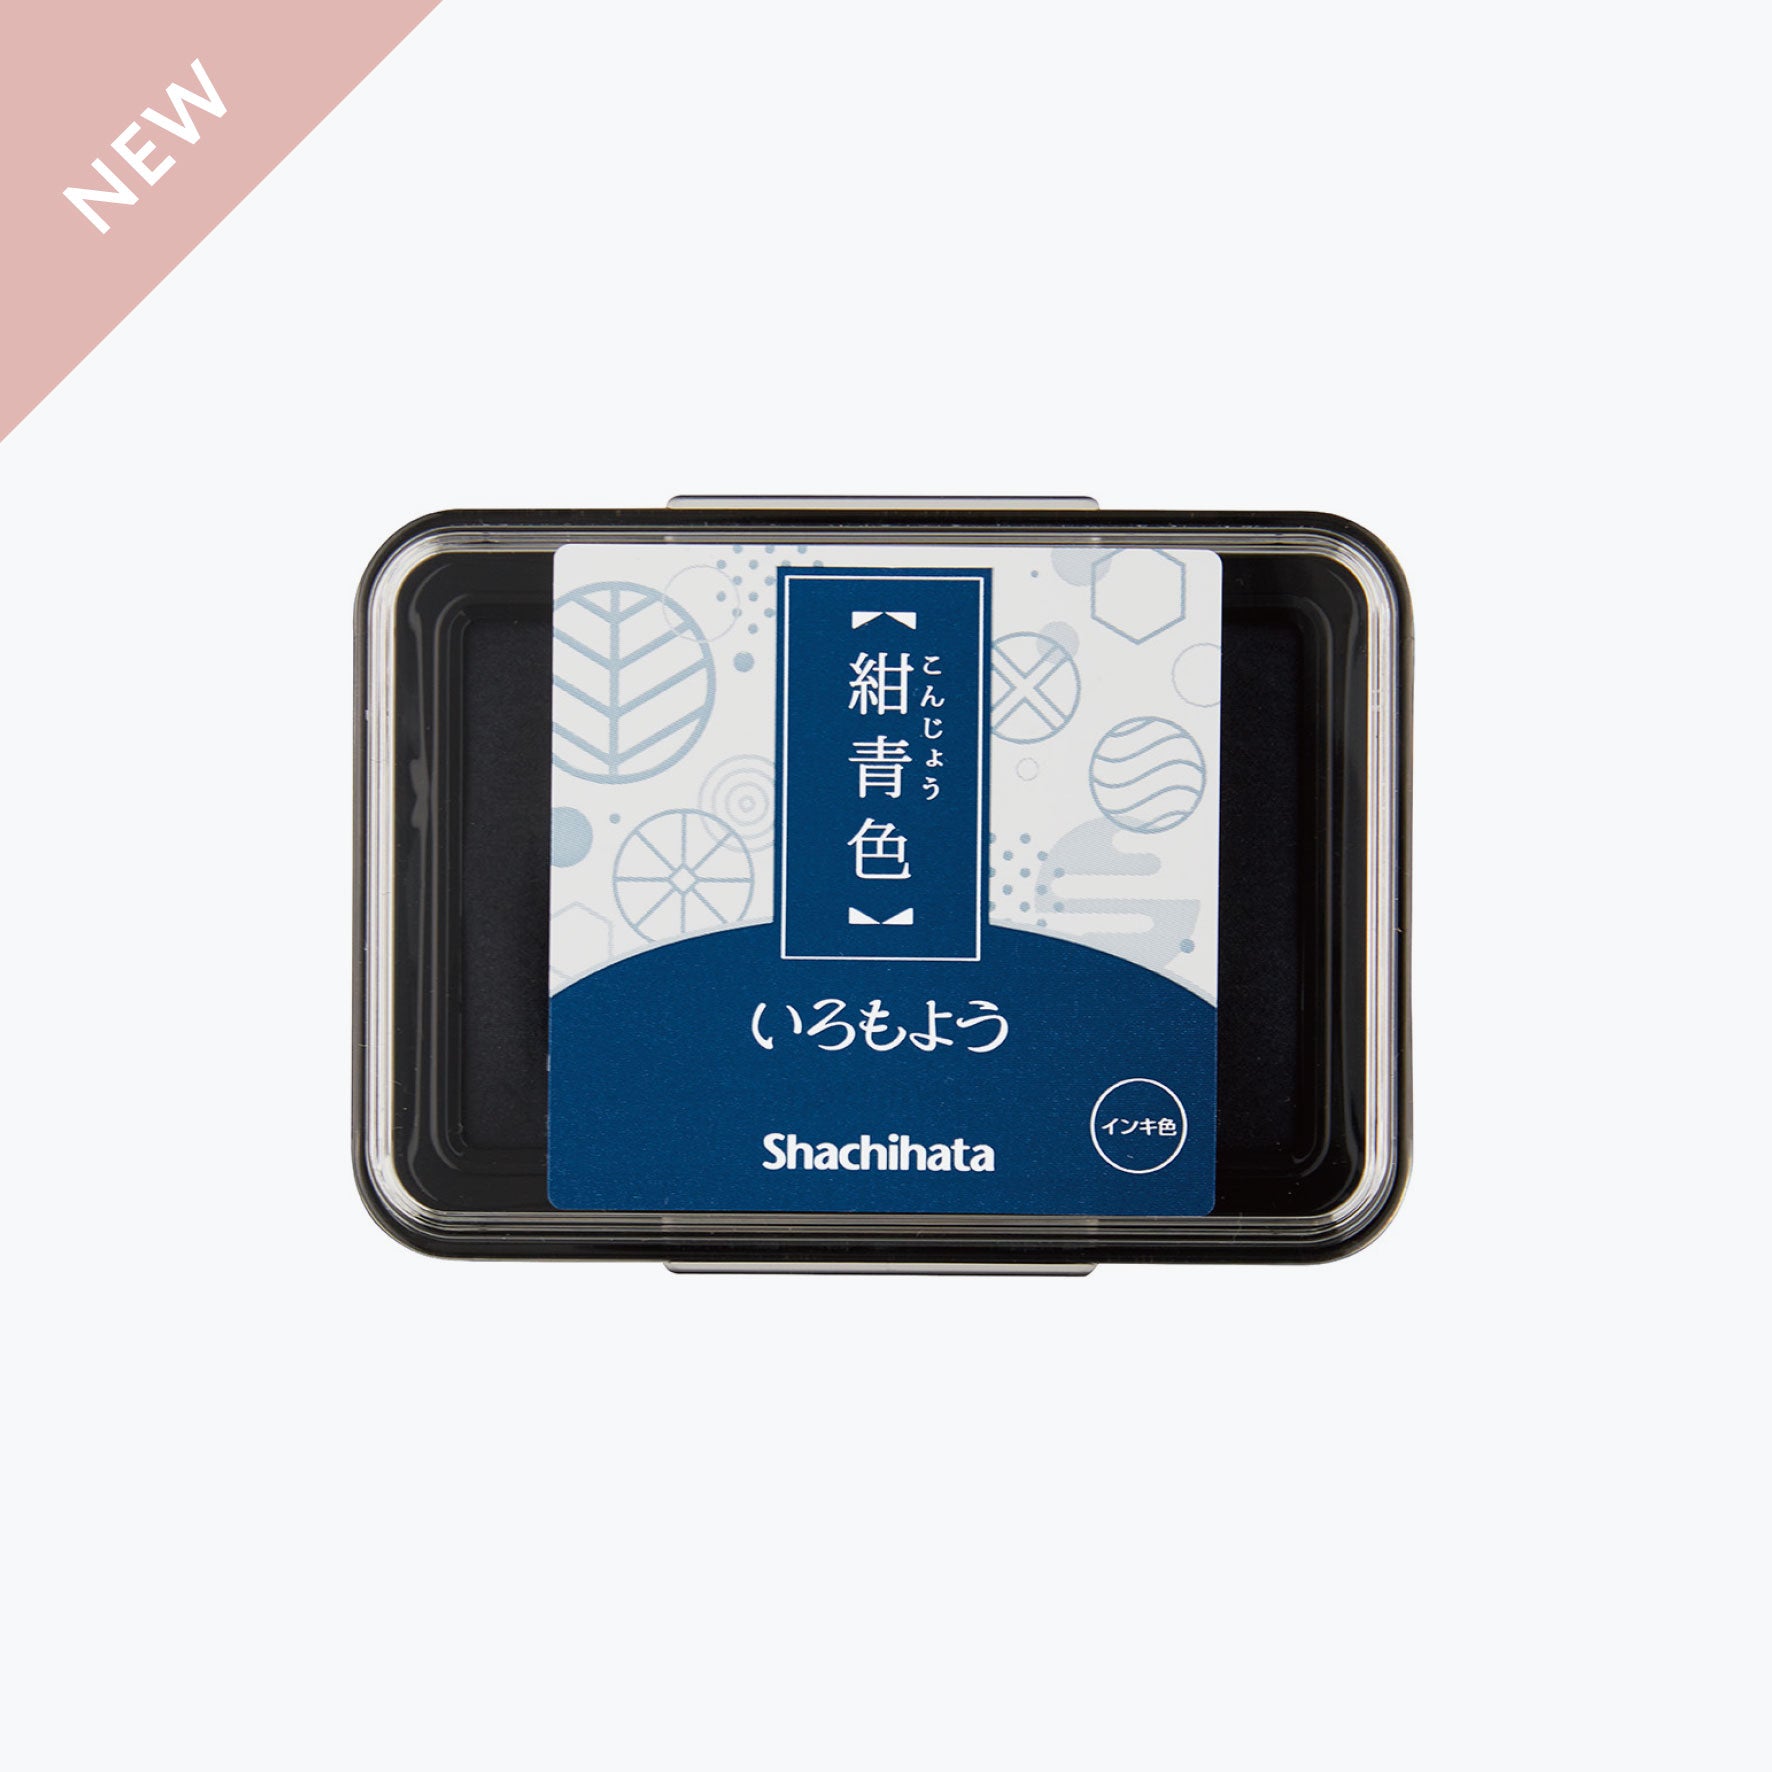 Shachihata - Stamp Pad - Oil-Based Ink - Iromoyo 2021 - HAC-1L-DB